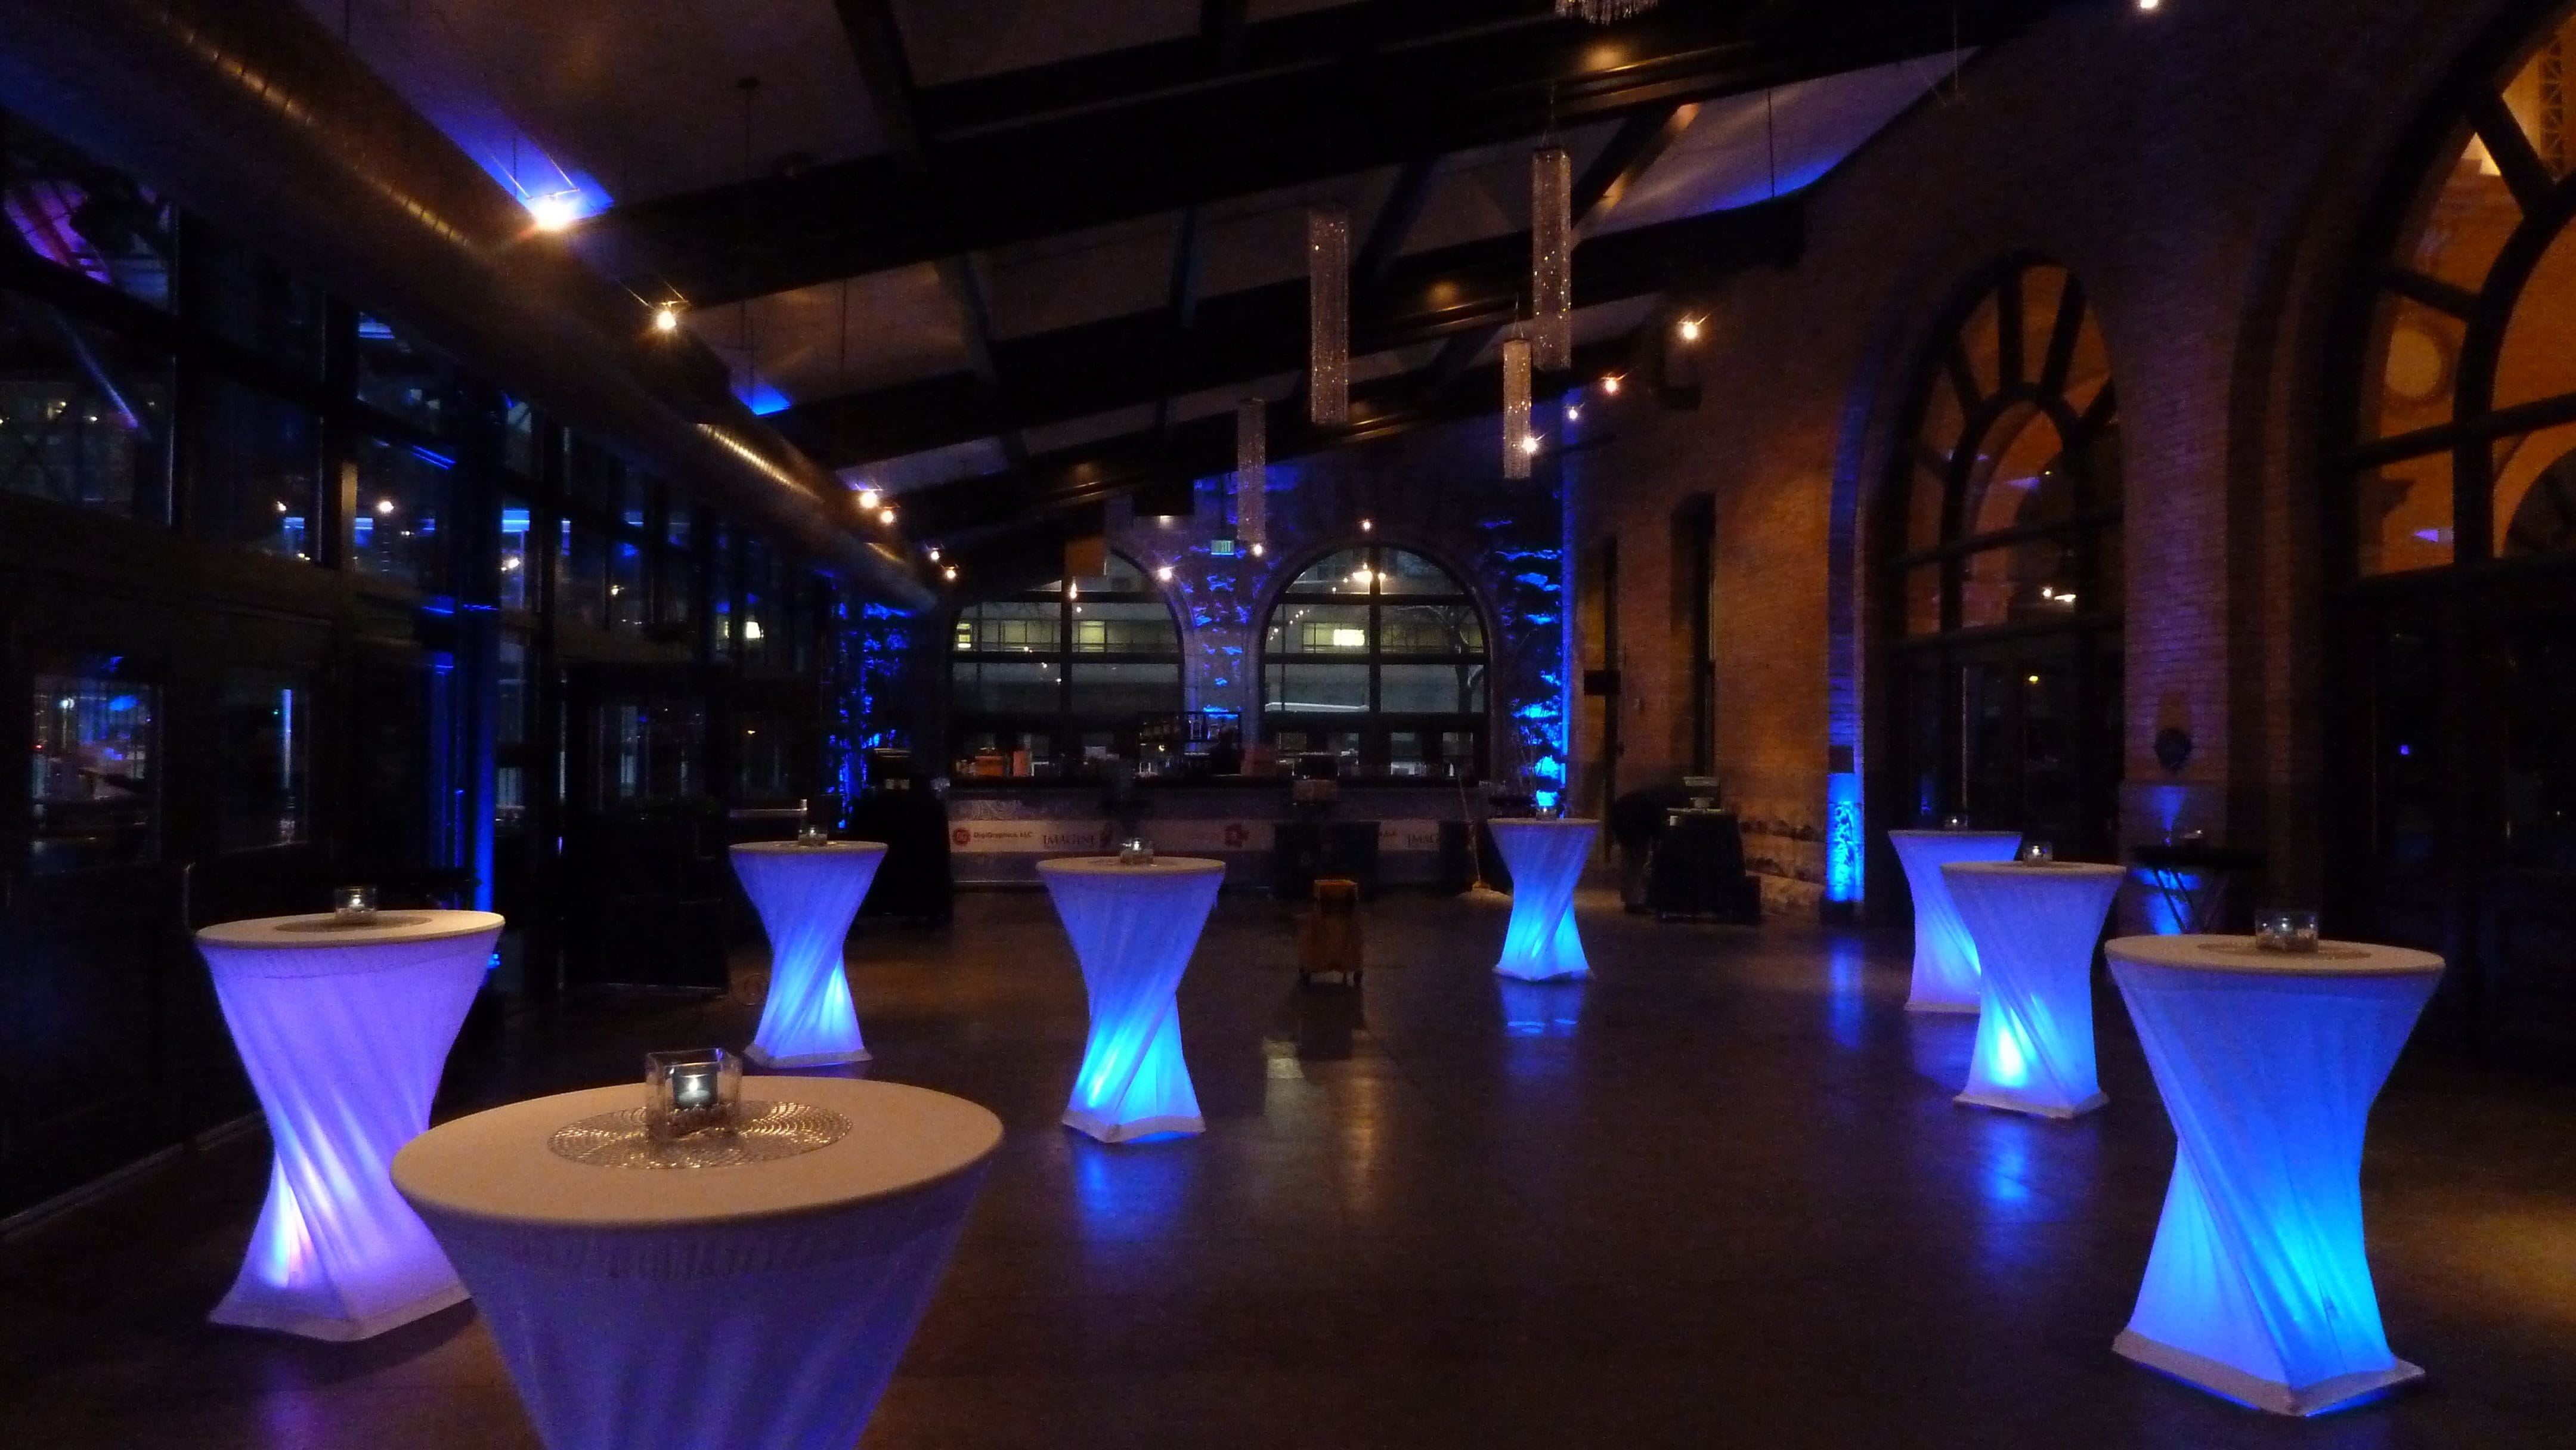 Renaissance Minneapolis, The Depot. Up lighting in blue with snowflake gobos. Decor by Event Lab